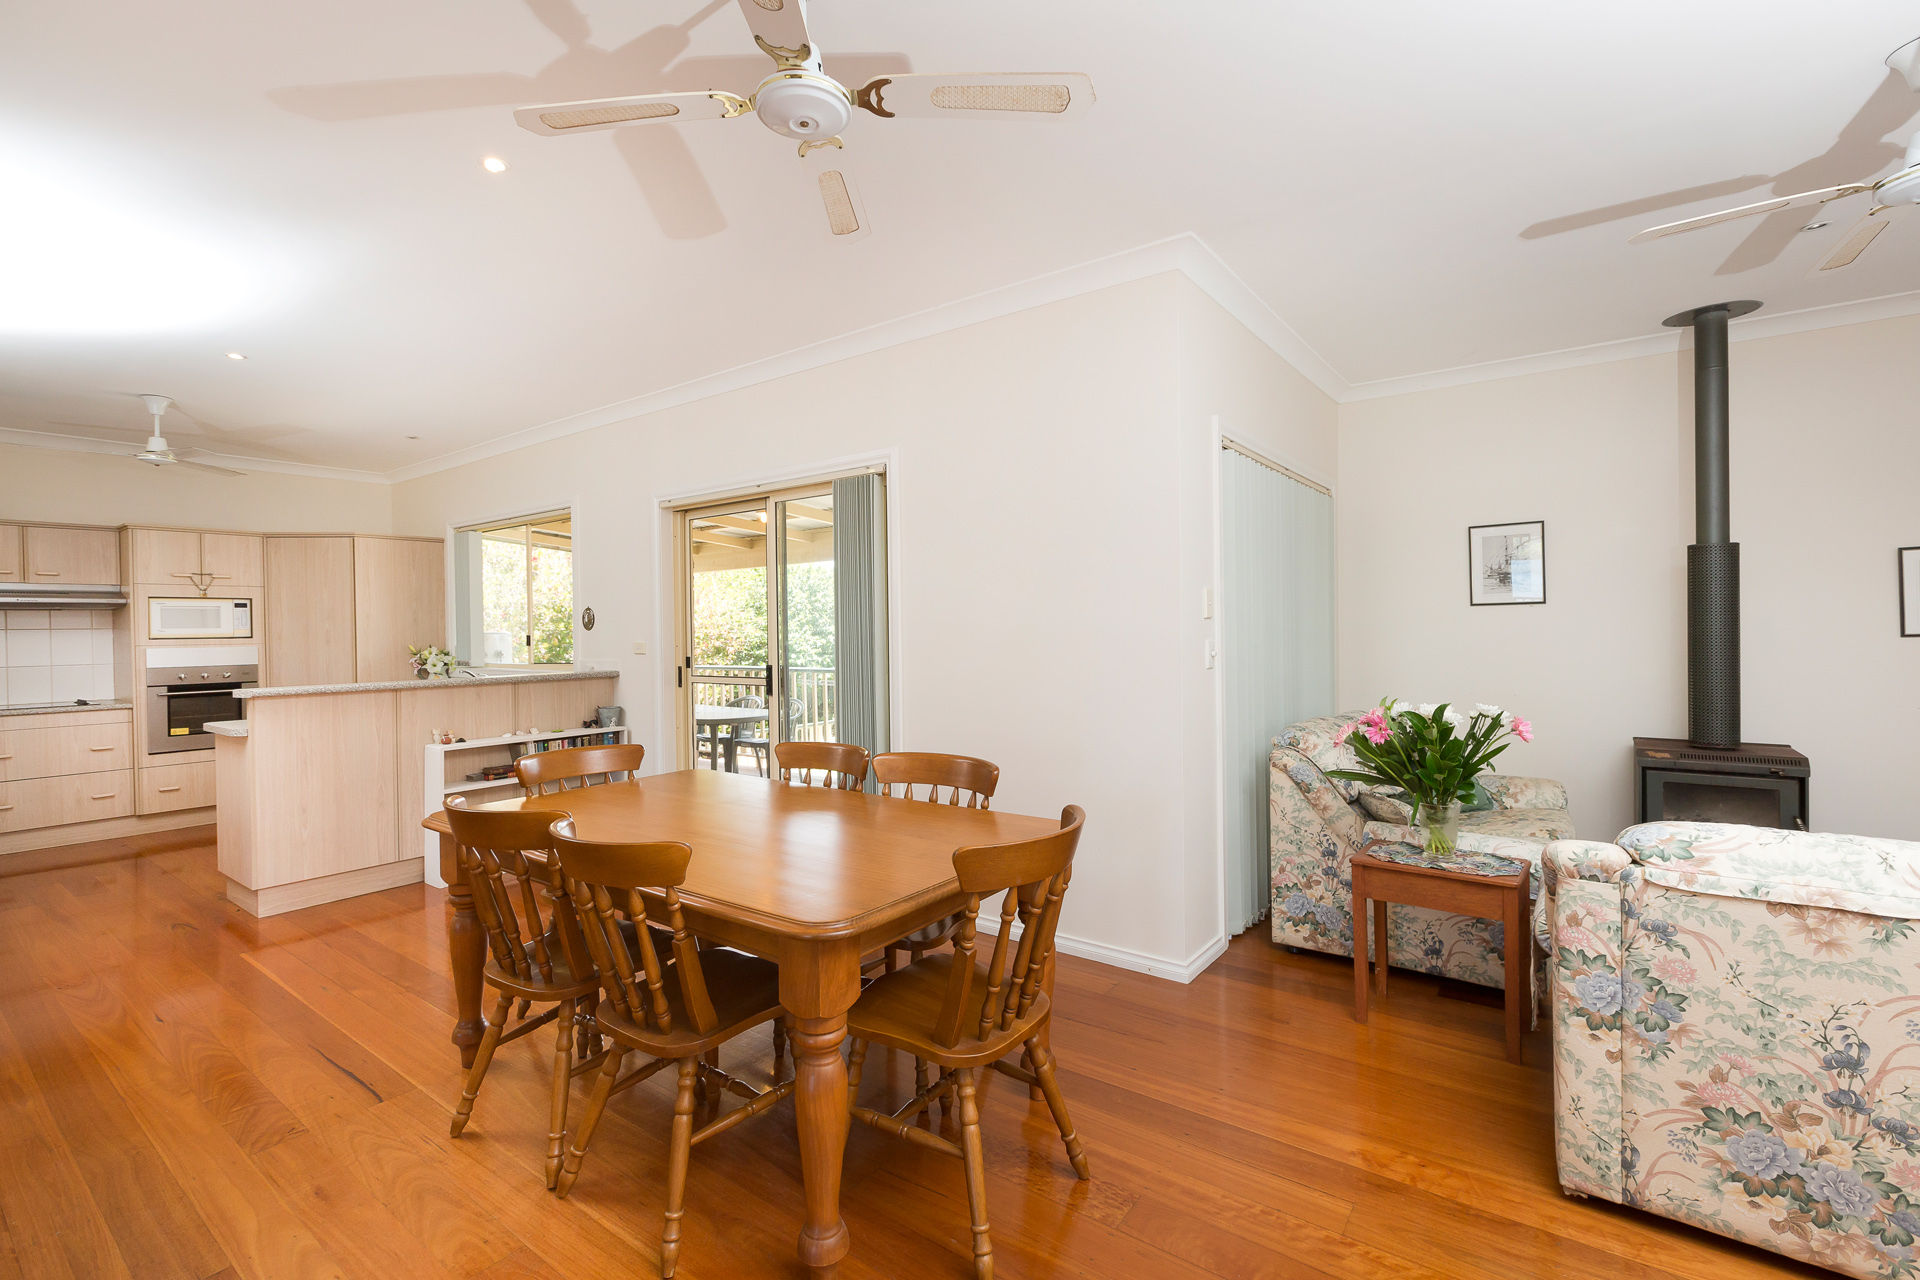 Cranford Waterfront Cottage - Coogee Beach Accommodation 6